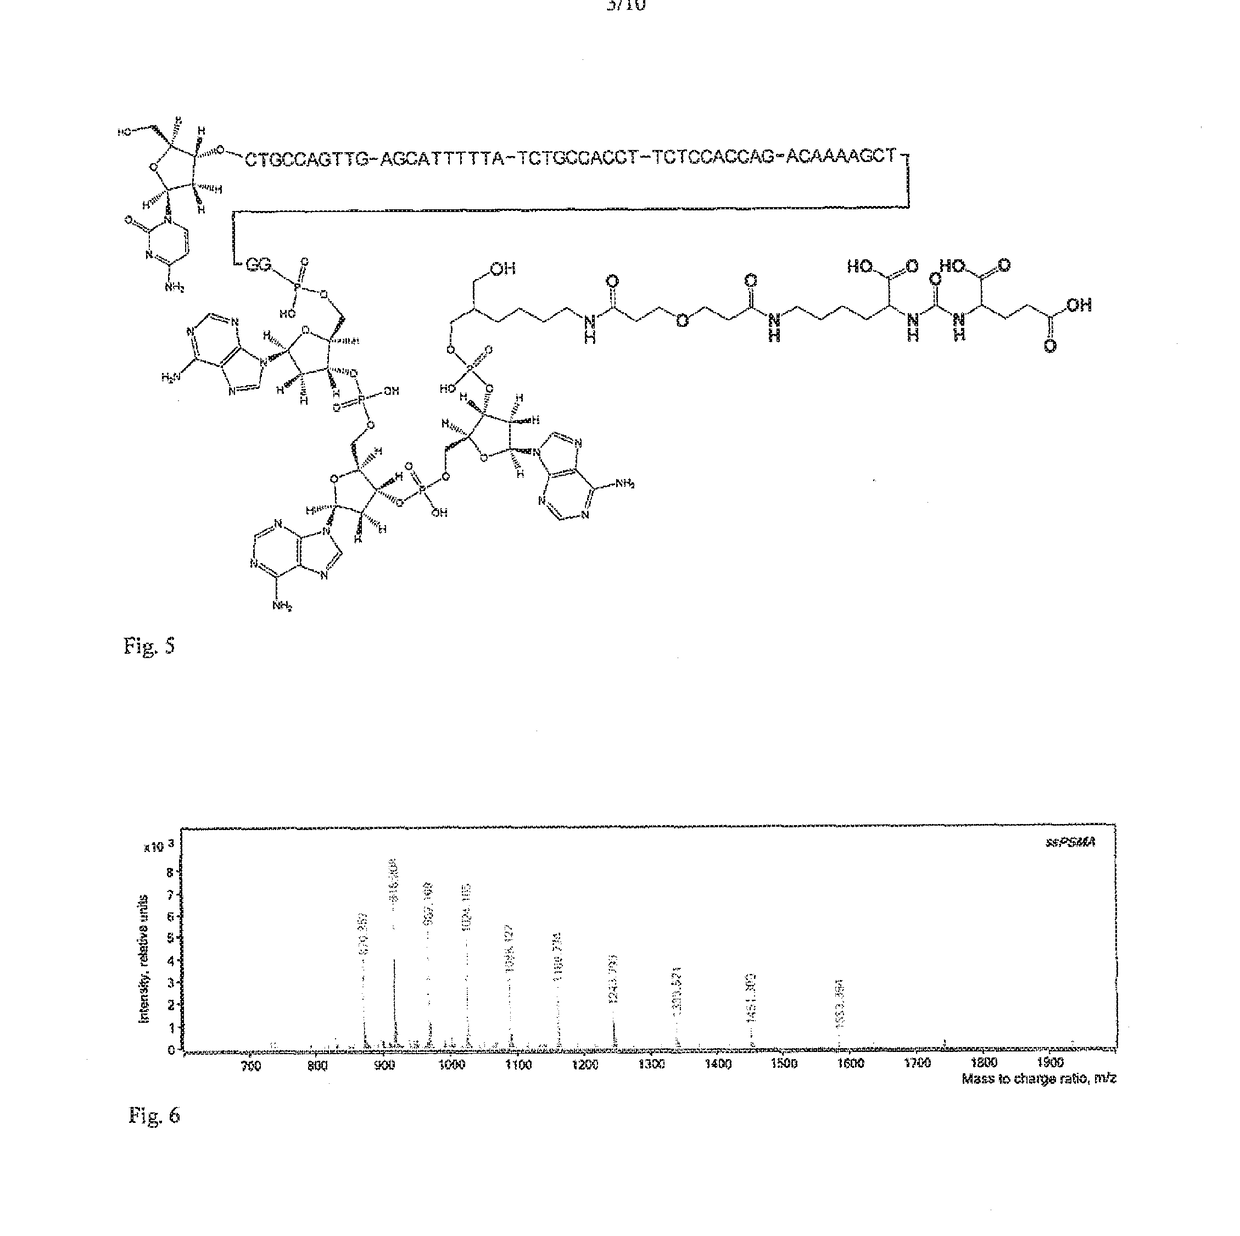 Method of detection of analyte active forms and determination of the ability of substances to bind into analyte active sites